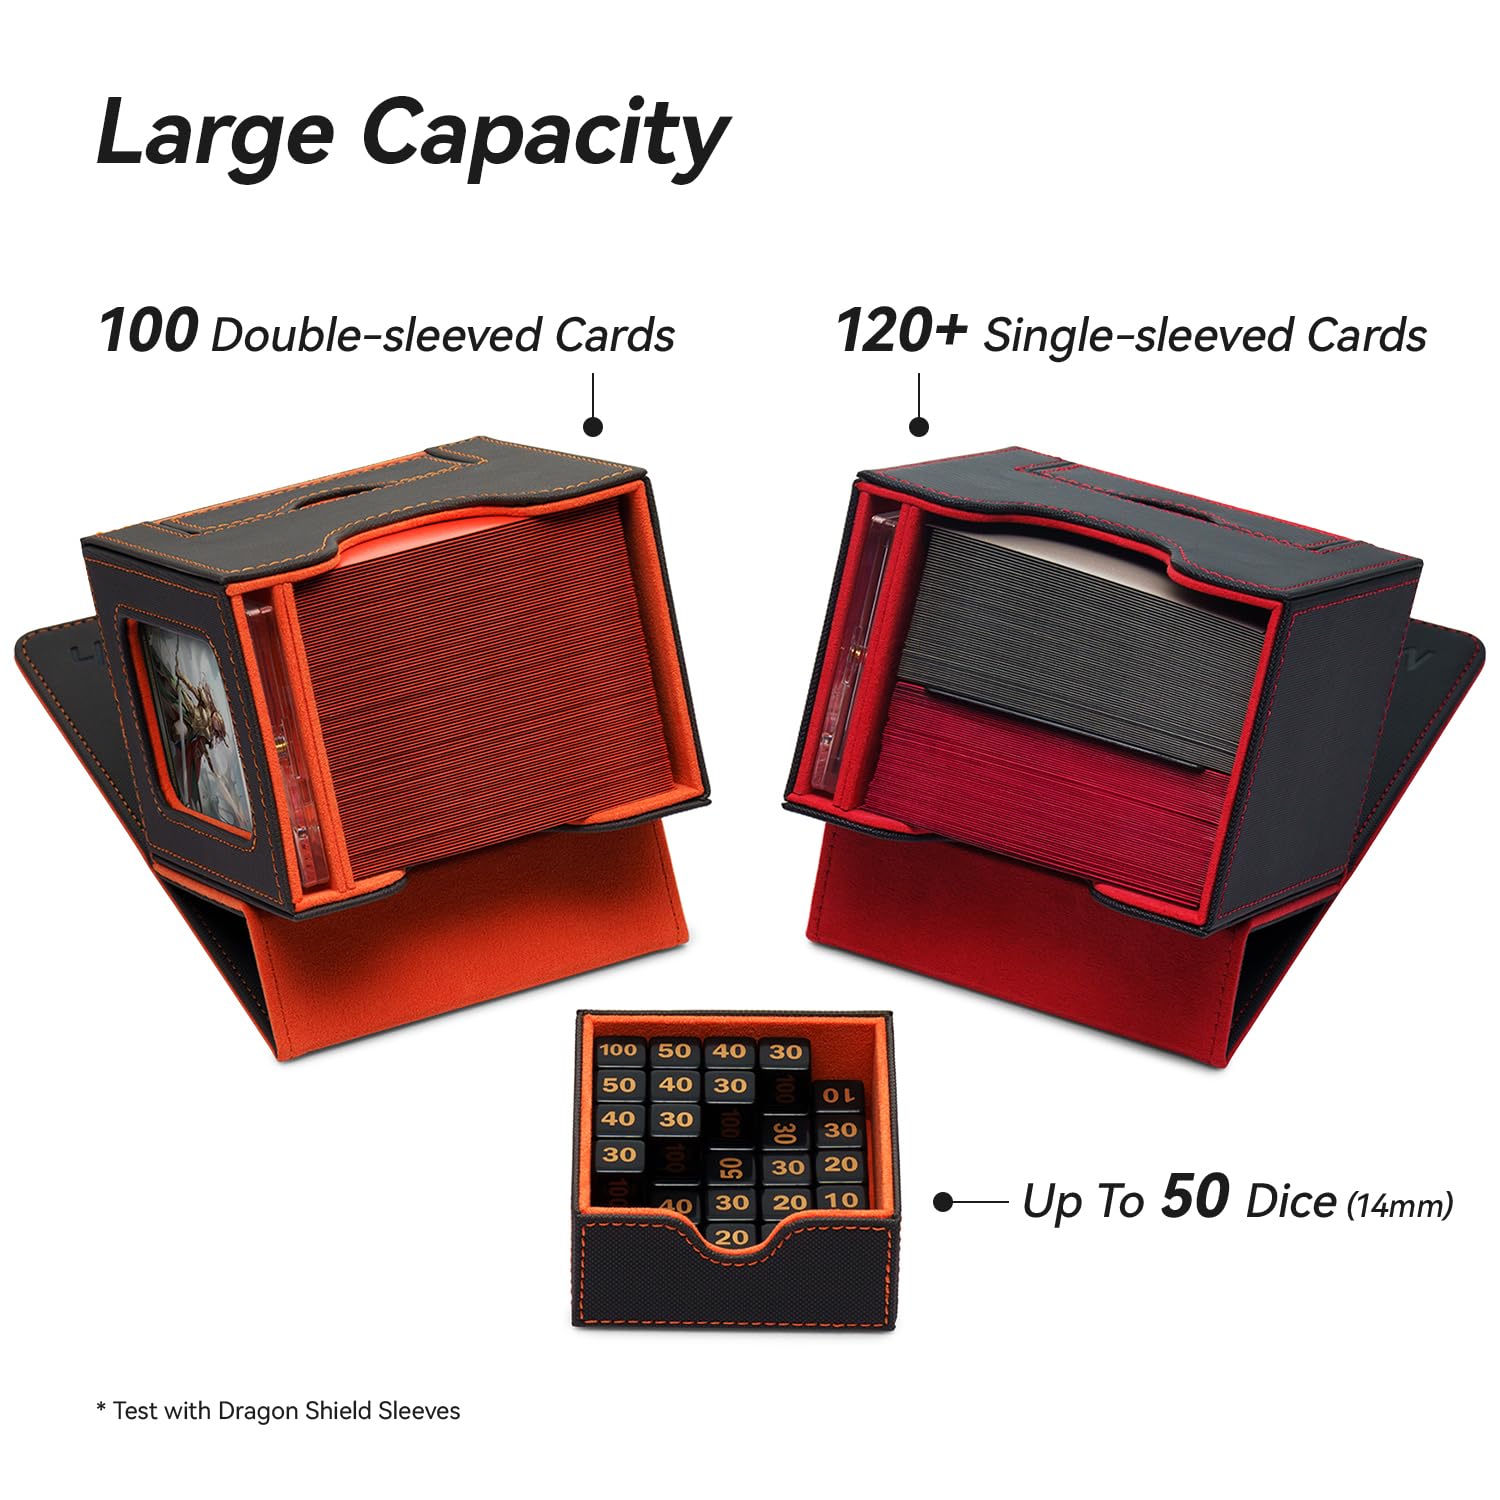 Mage Tech Card Deck Box for MTG Commander - Patented Design, Commander Display, As Deck Holder, Fits 100 Double-Sleeved Cards, Include 35pt Card Brick & Dice Tray - Horizontal Black/Red